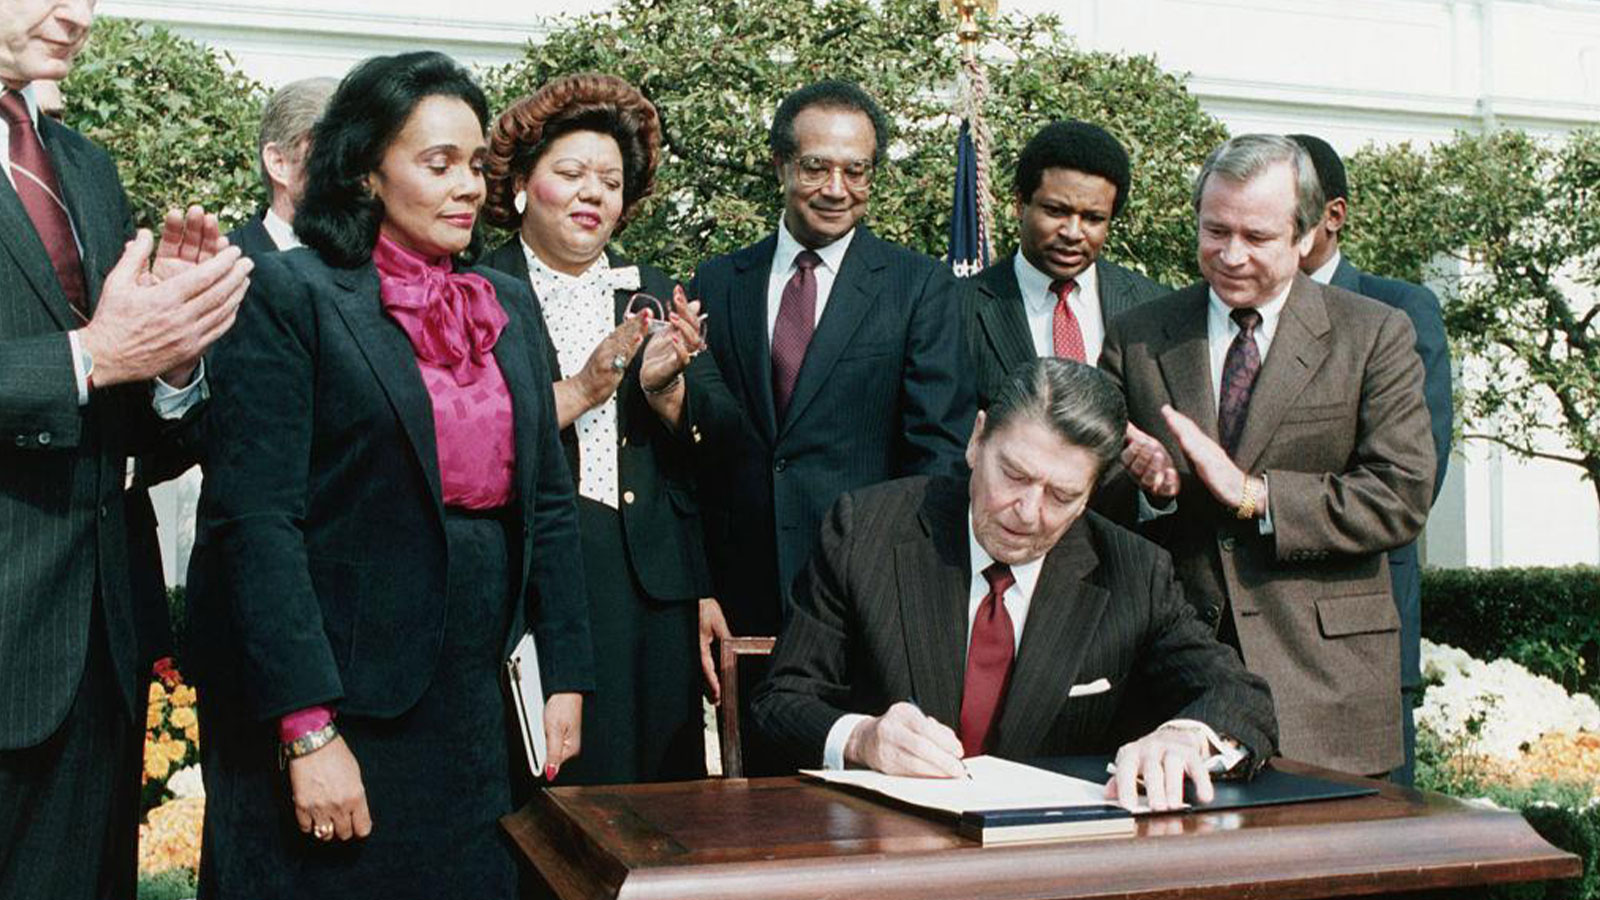 In the presence of Coretta Scott King (2nd from left), President Ronald Reagan signs a bill making Martin Luther King Jr.'s birthday a national holiday. 